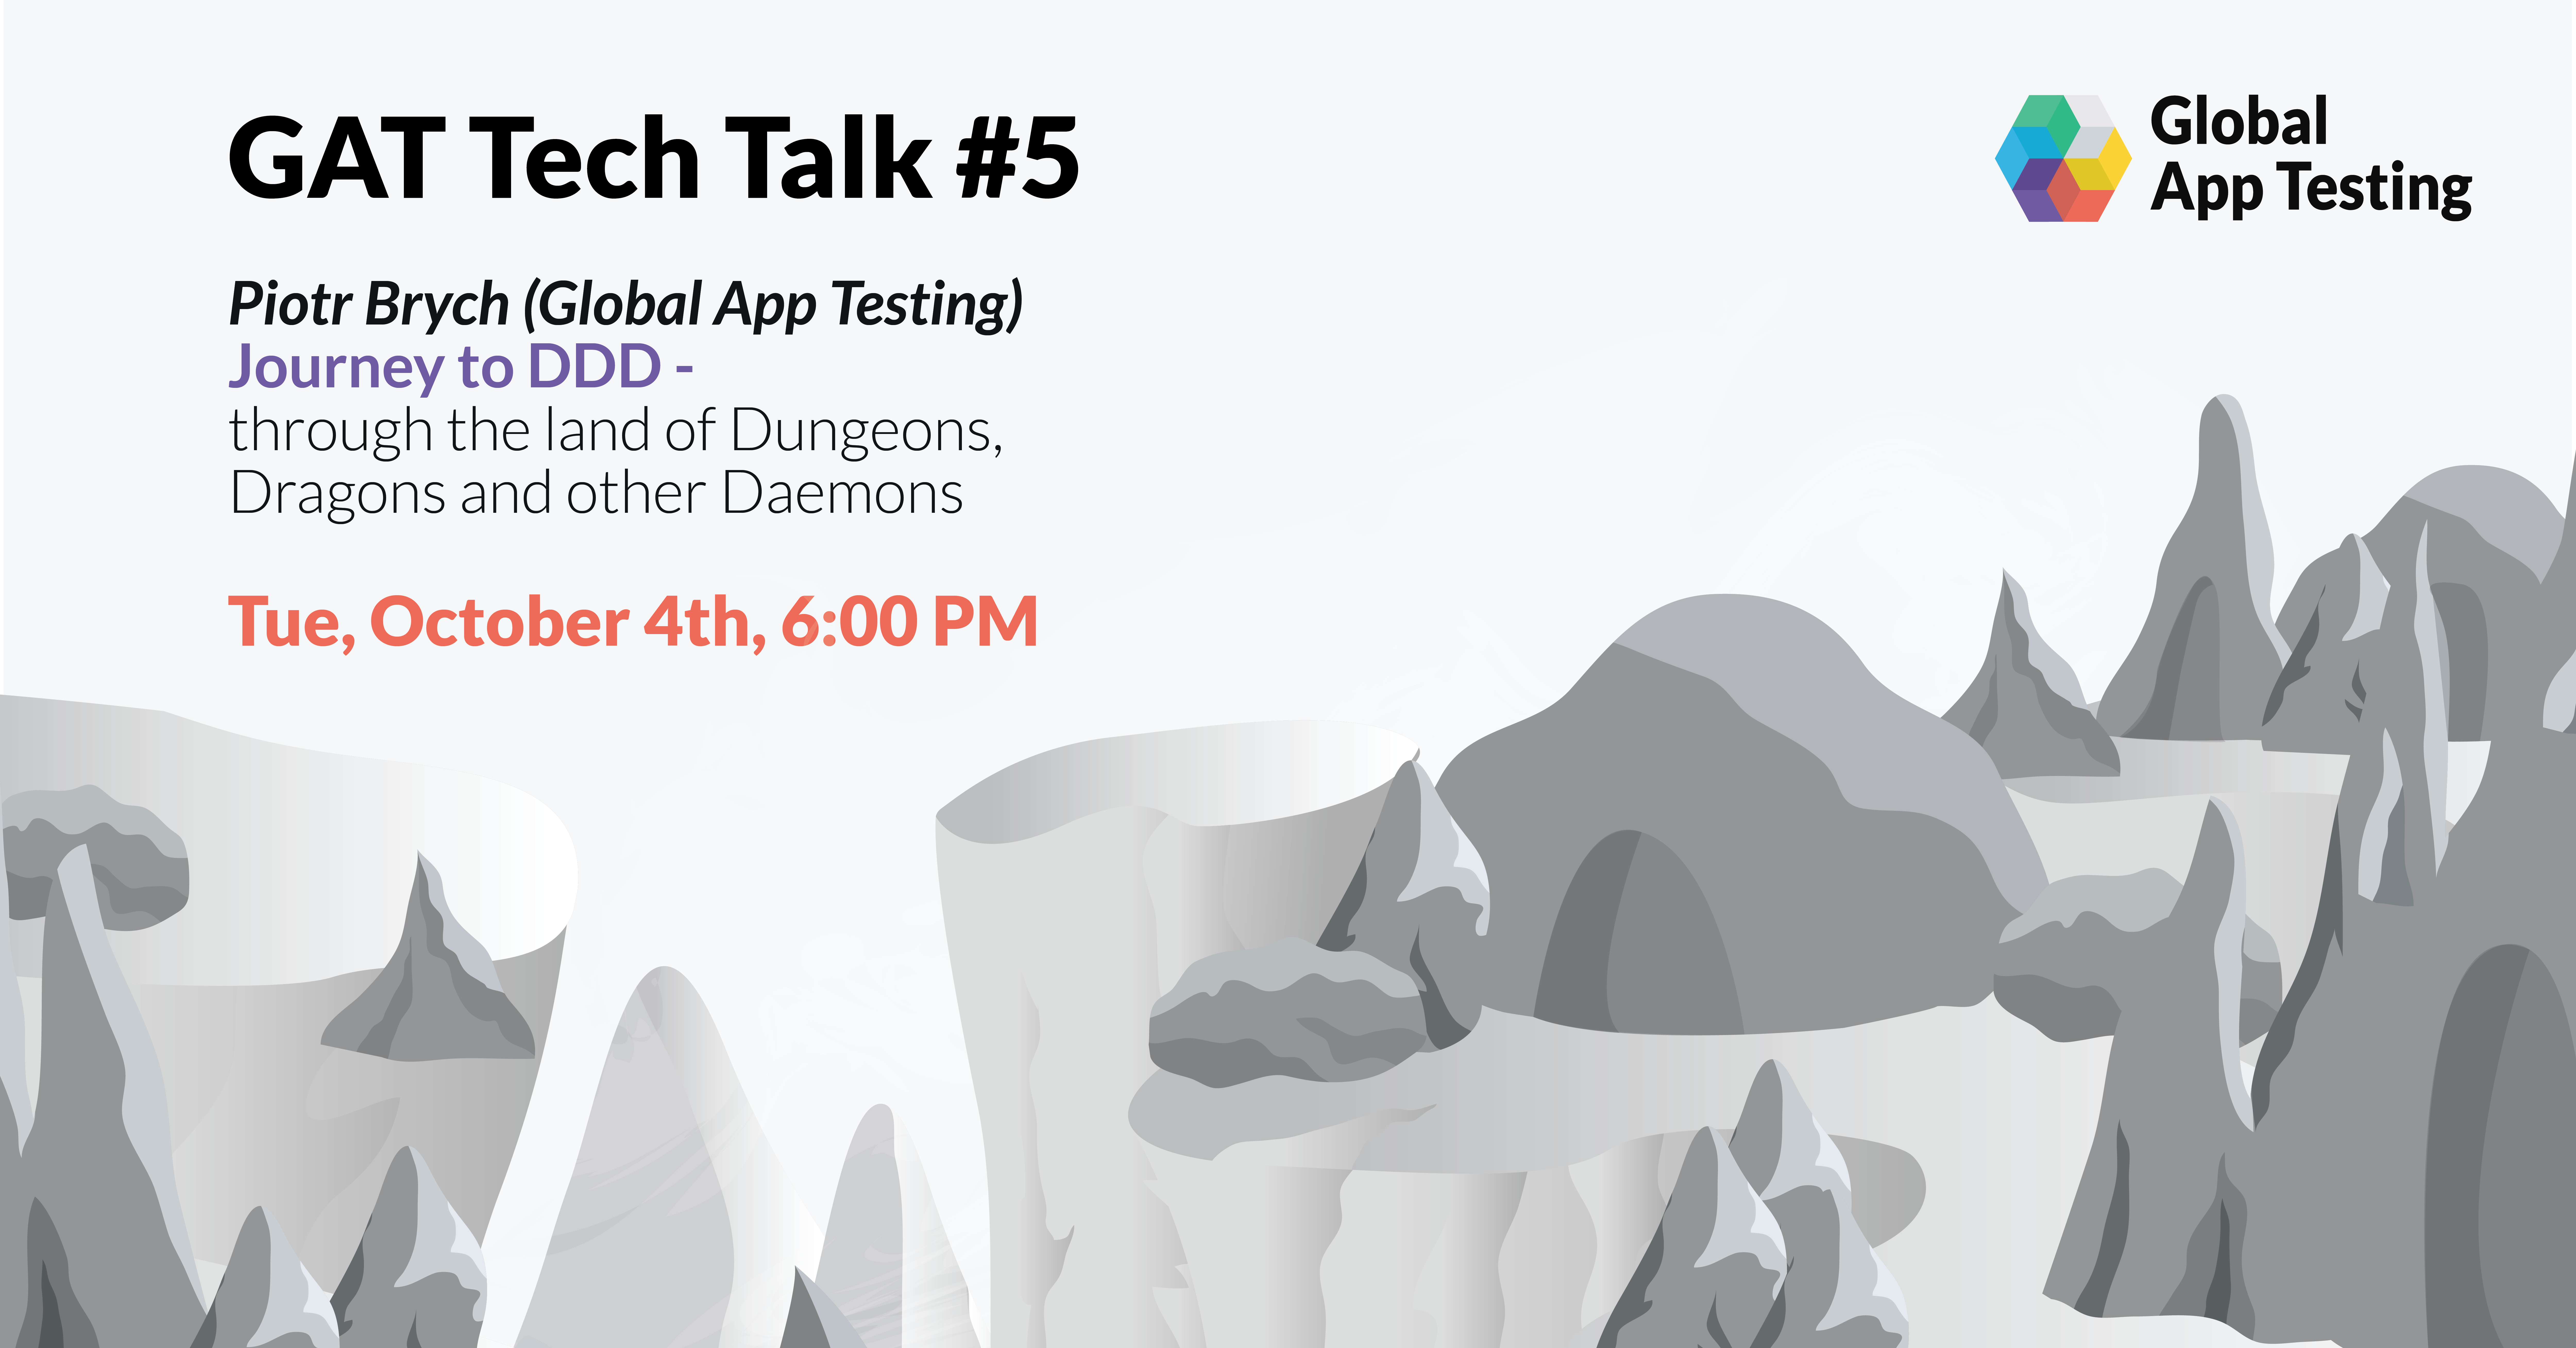 GAT TechTalk #5 – Journey to DDD Through the Land of Dungeons, Dragons and Other Daemons